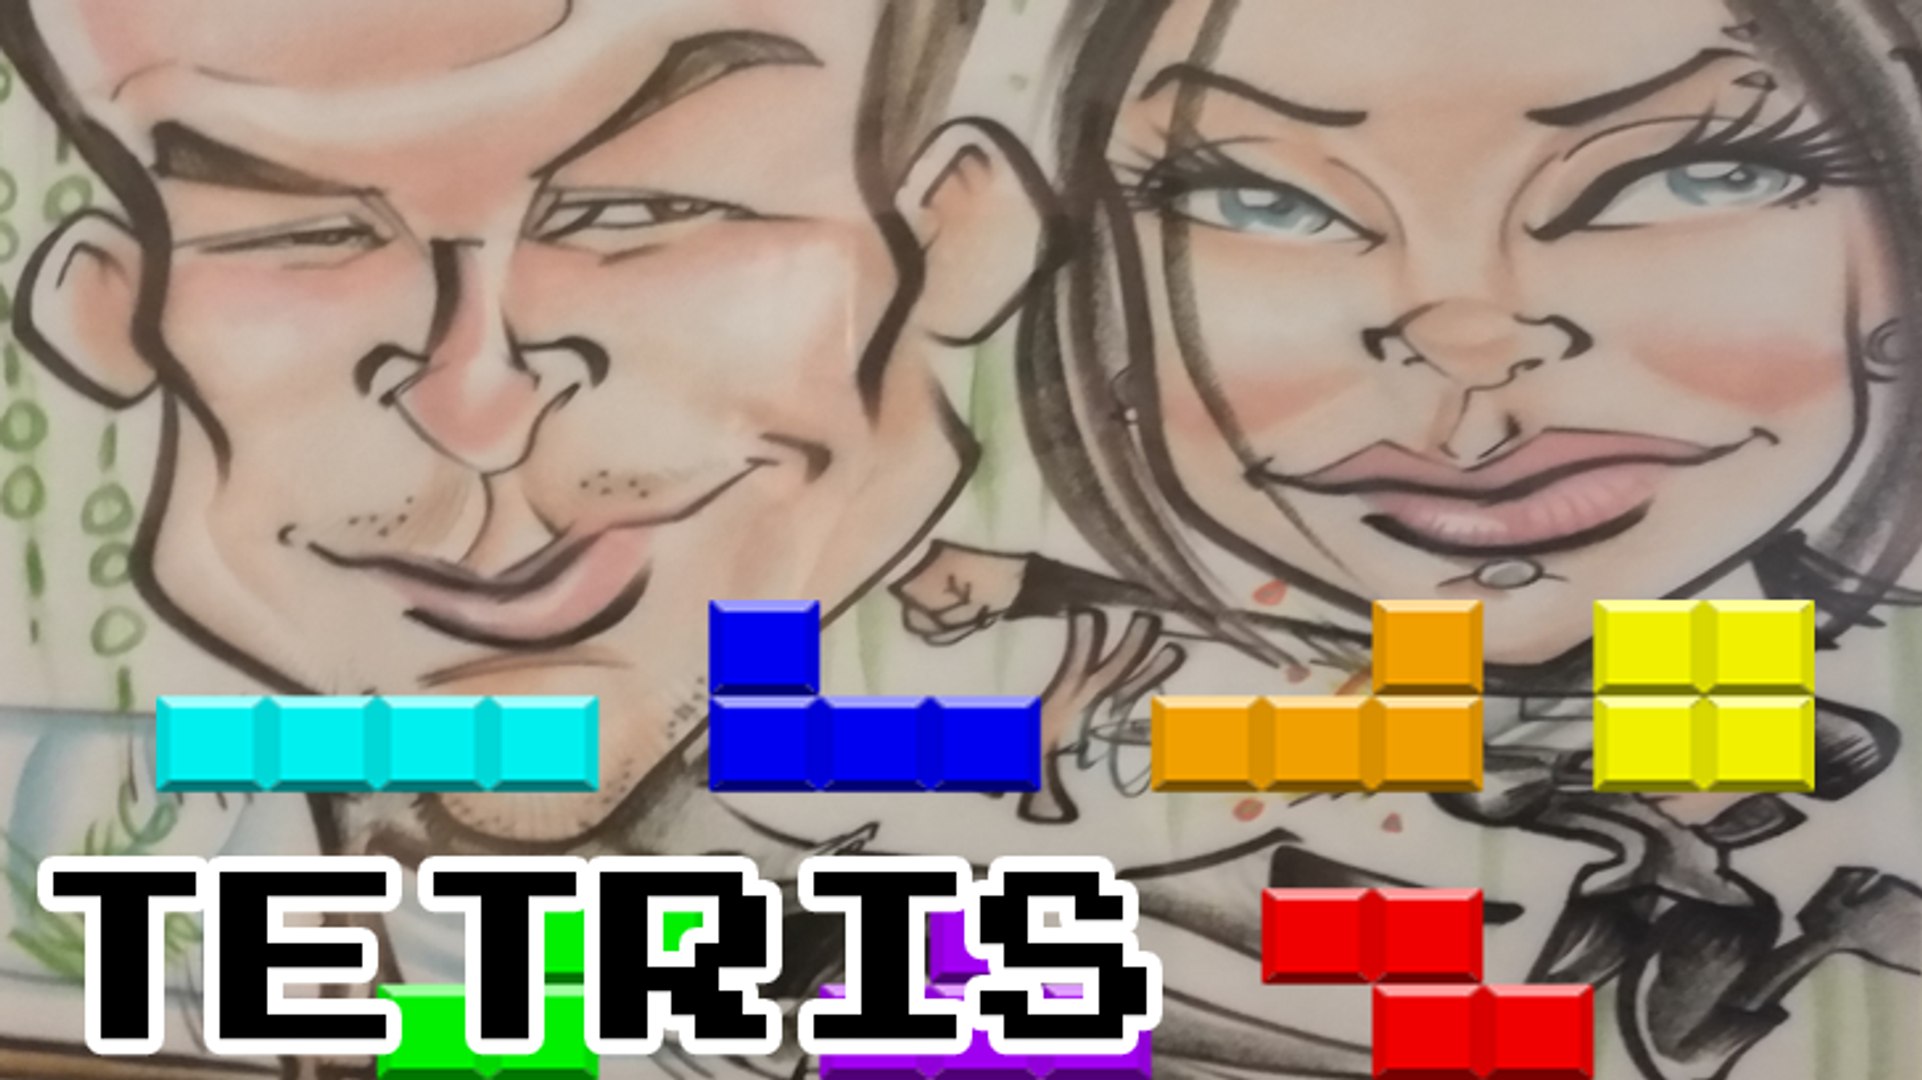 Tetris - Play Together Stay Together E1